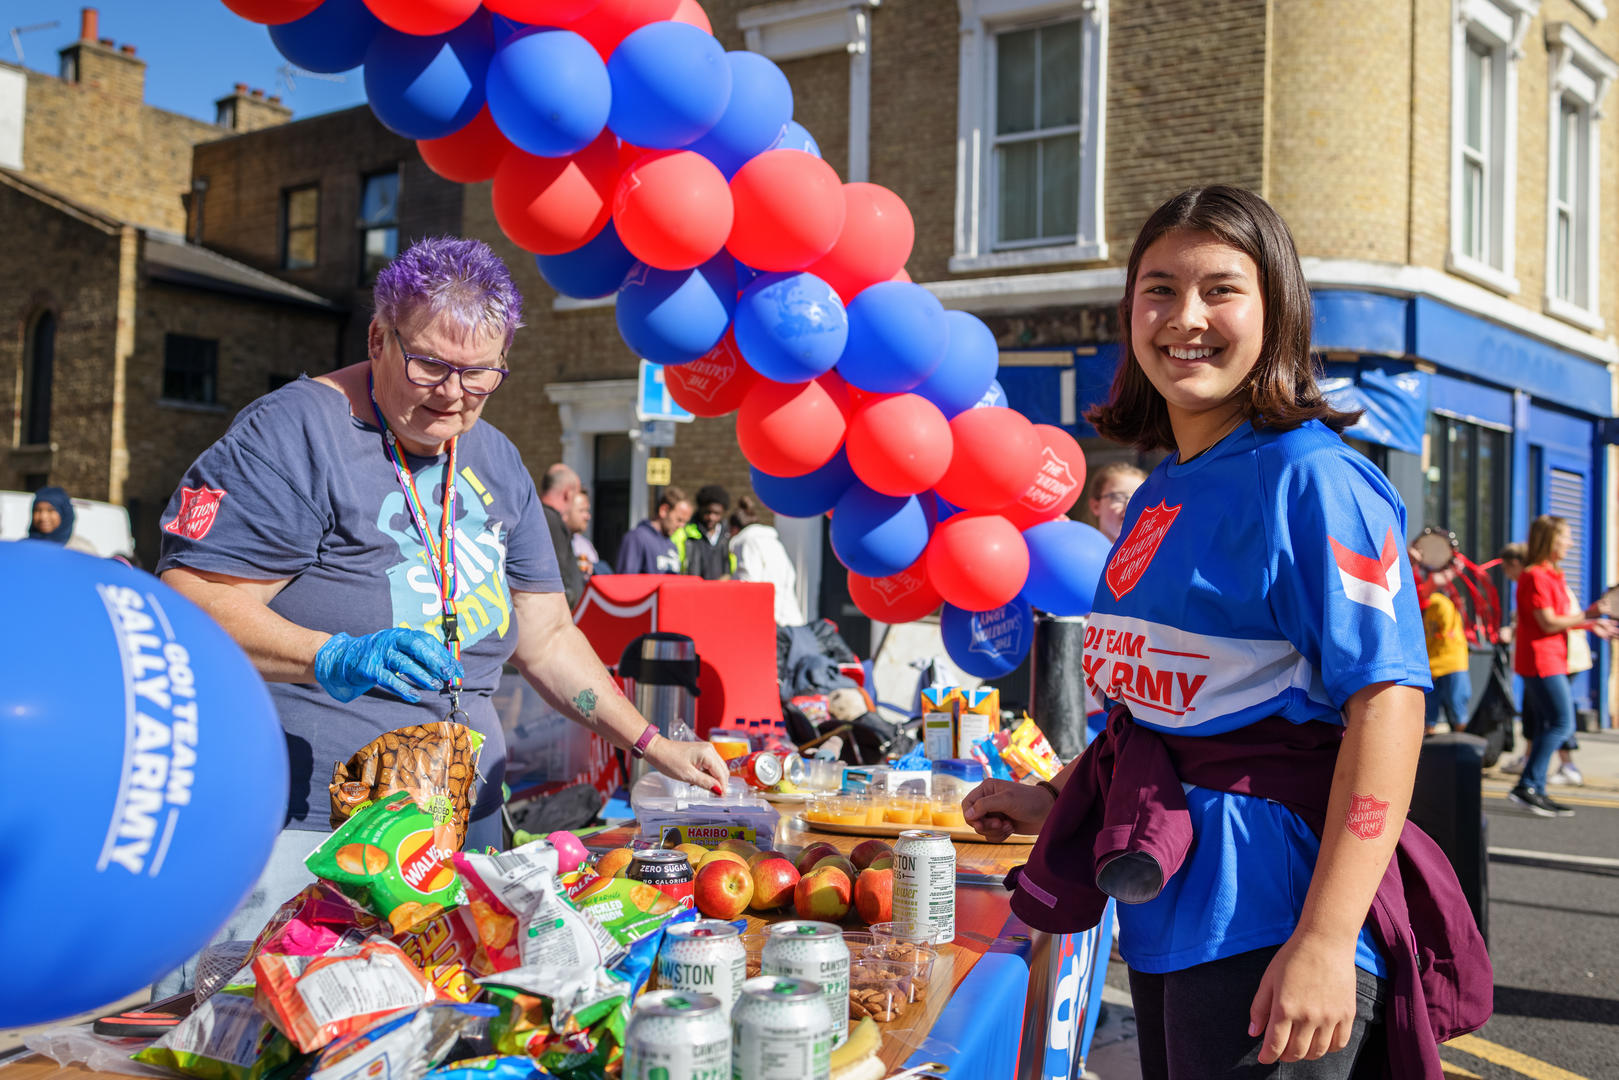 A smiling girl wearing a Salvation Army t-shirt helps to hand out food to runners at the London Marathon